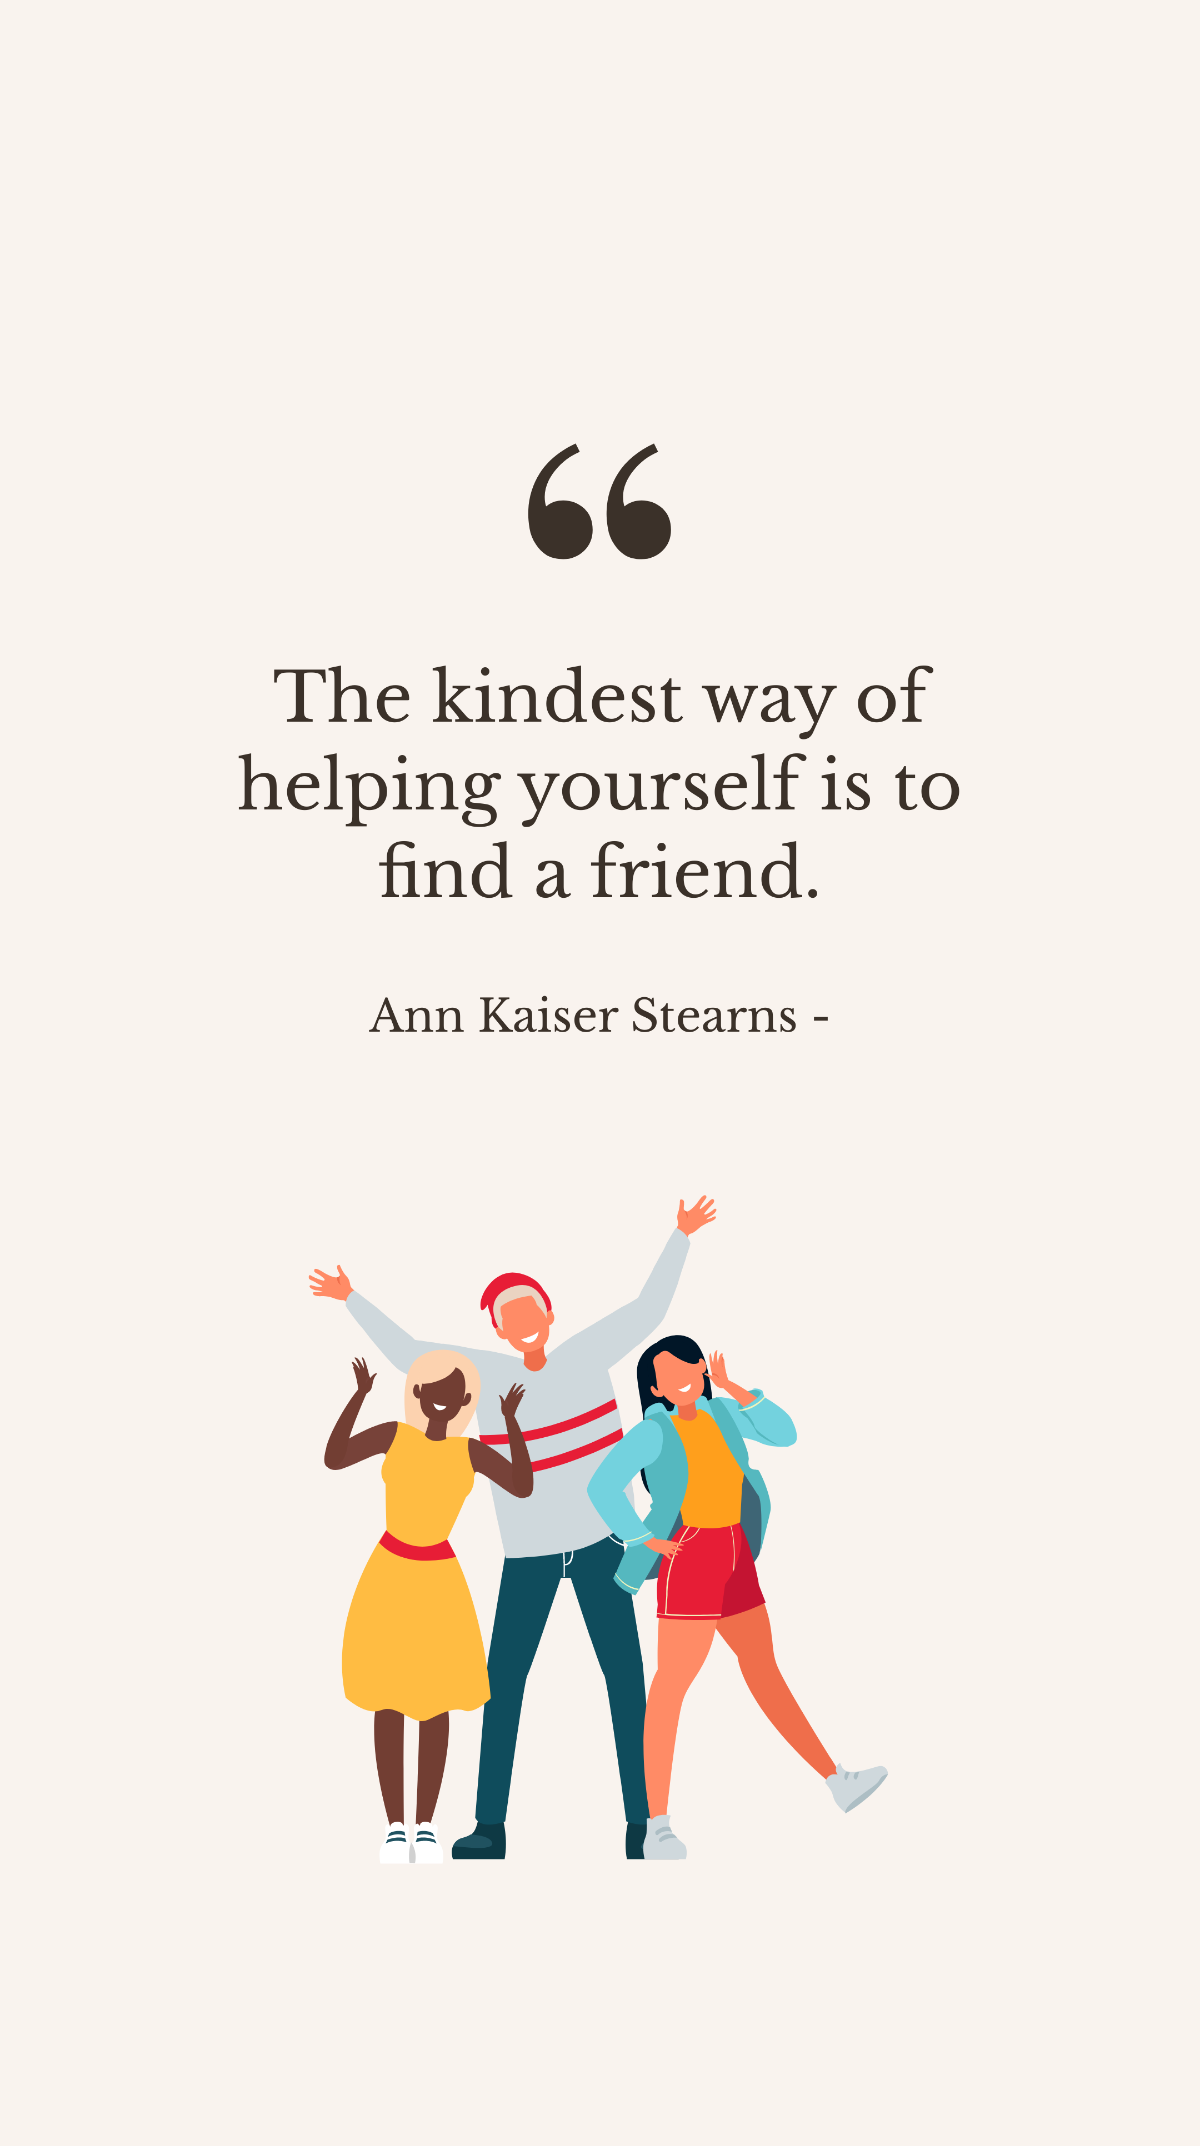 Ann Kaiser Stearns - The kindest way of helping yourself is to find a friend. Template